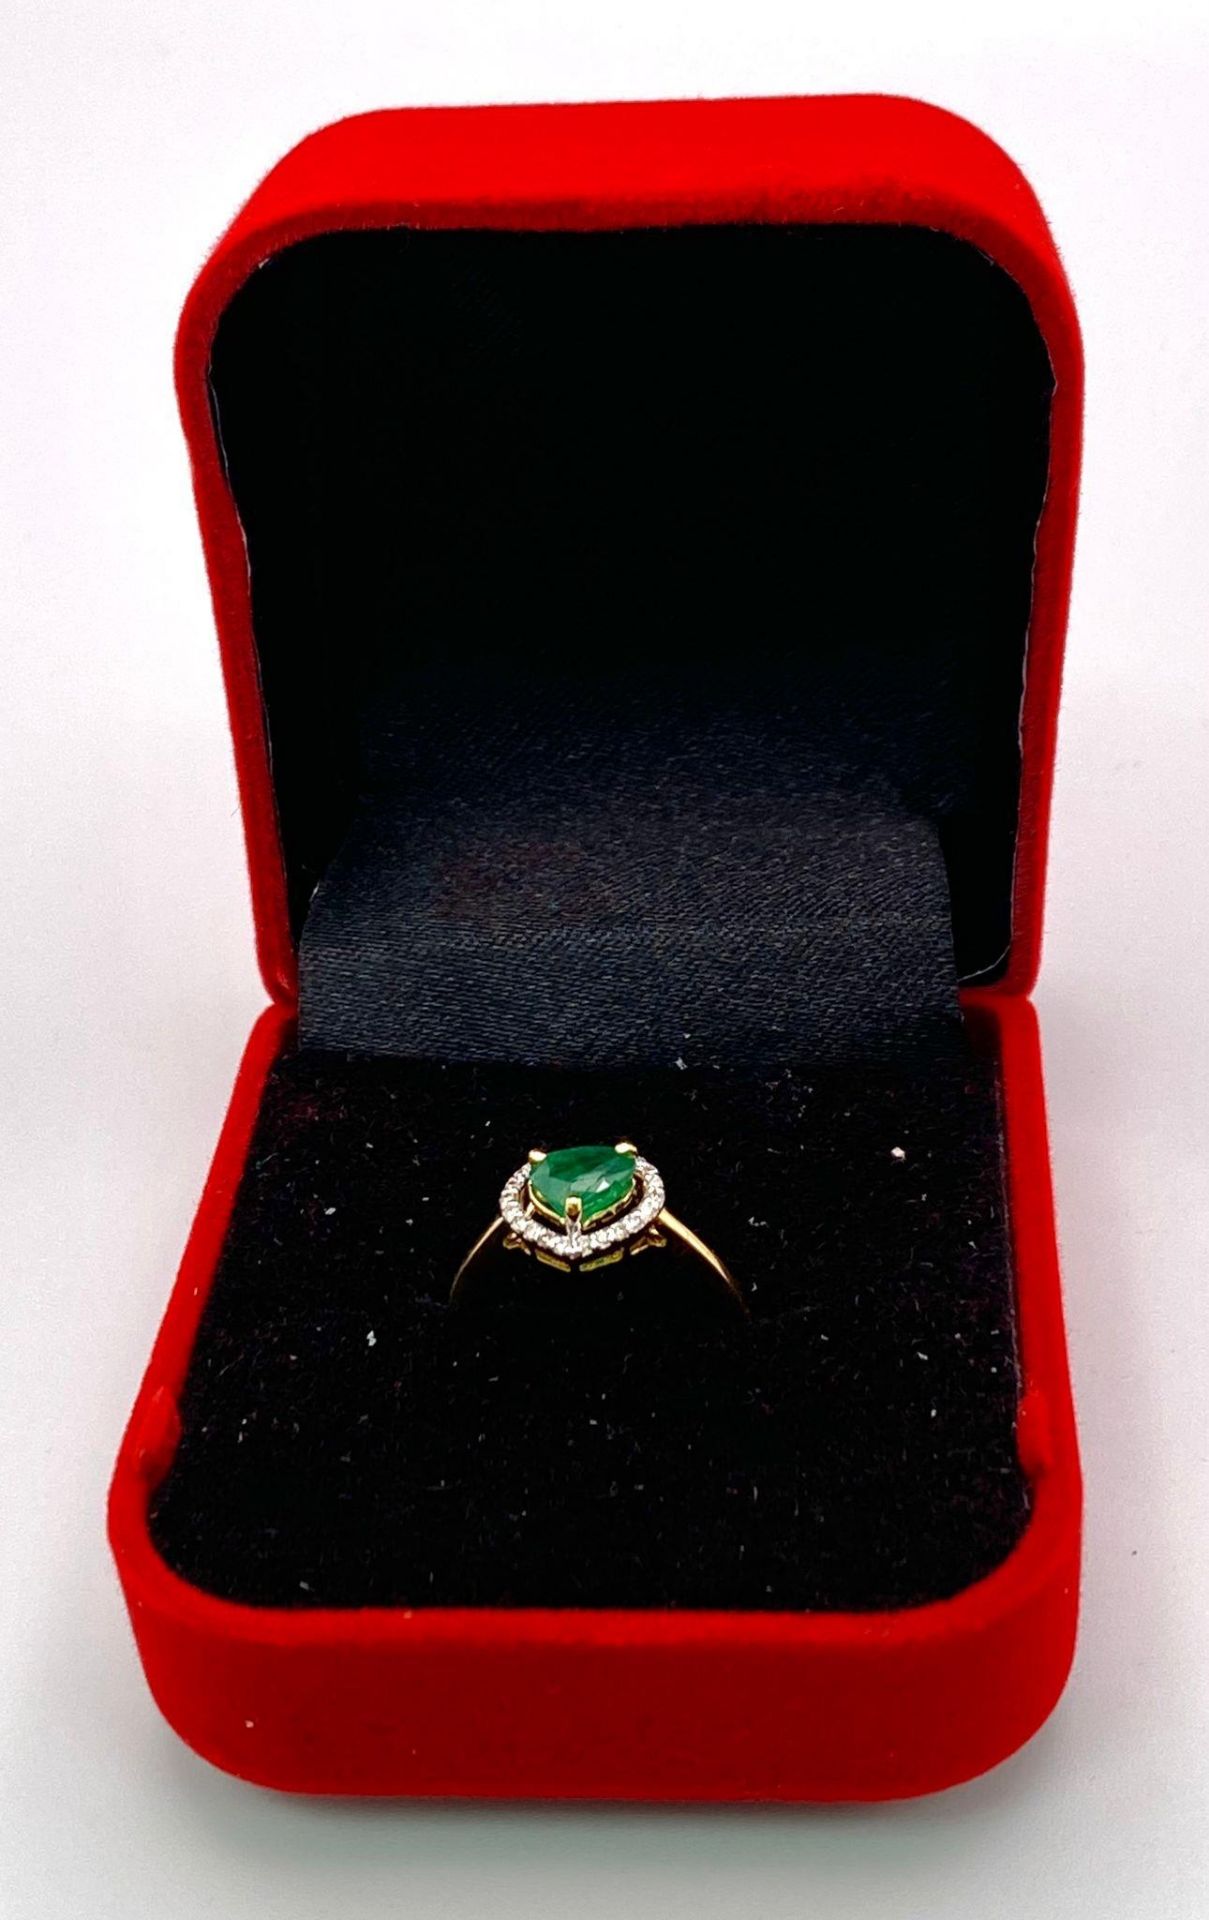 A 14K Gold Heart Shaped Emerald Gemstone Ring - with 0.18ctw of Diamond Accents. Emerald - 0.75ct. - Image 6 of 7